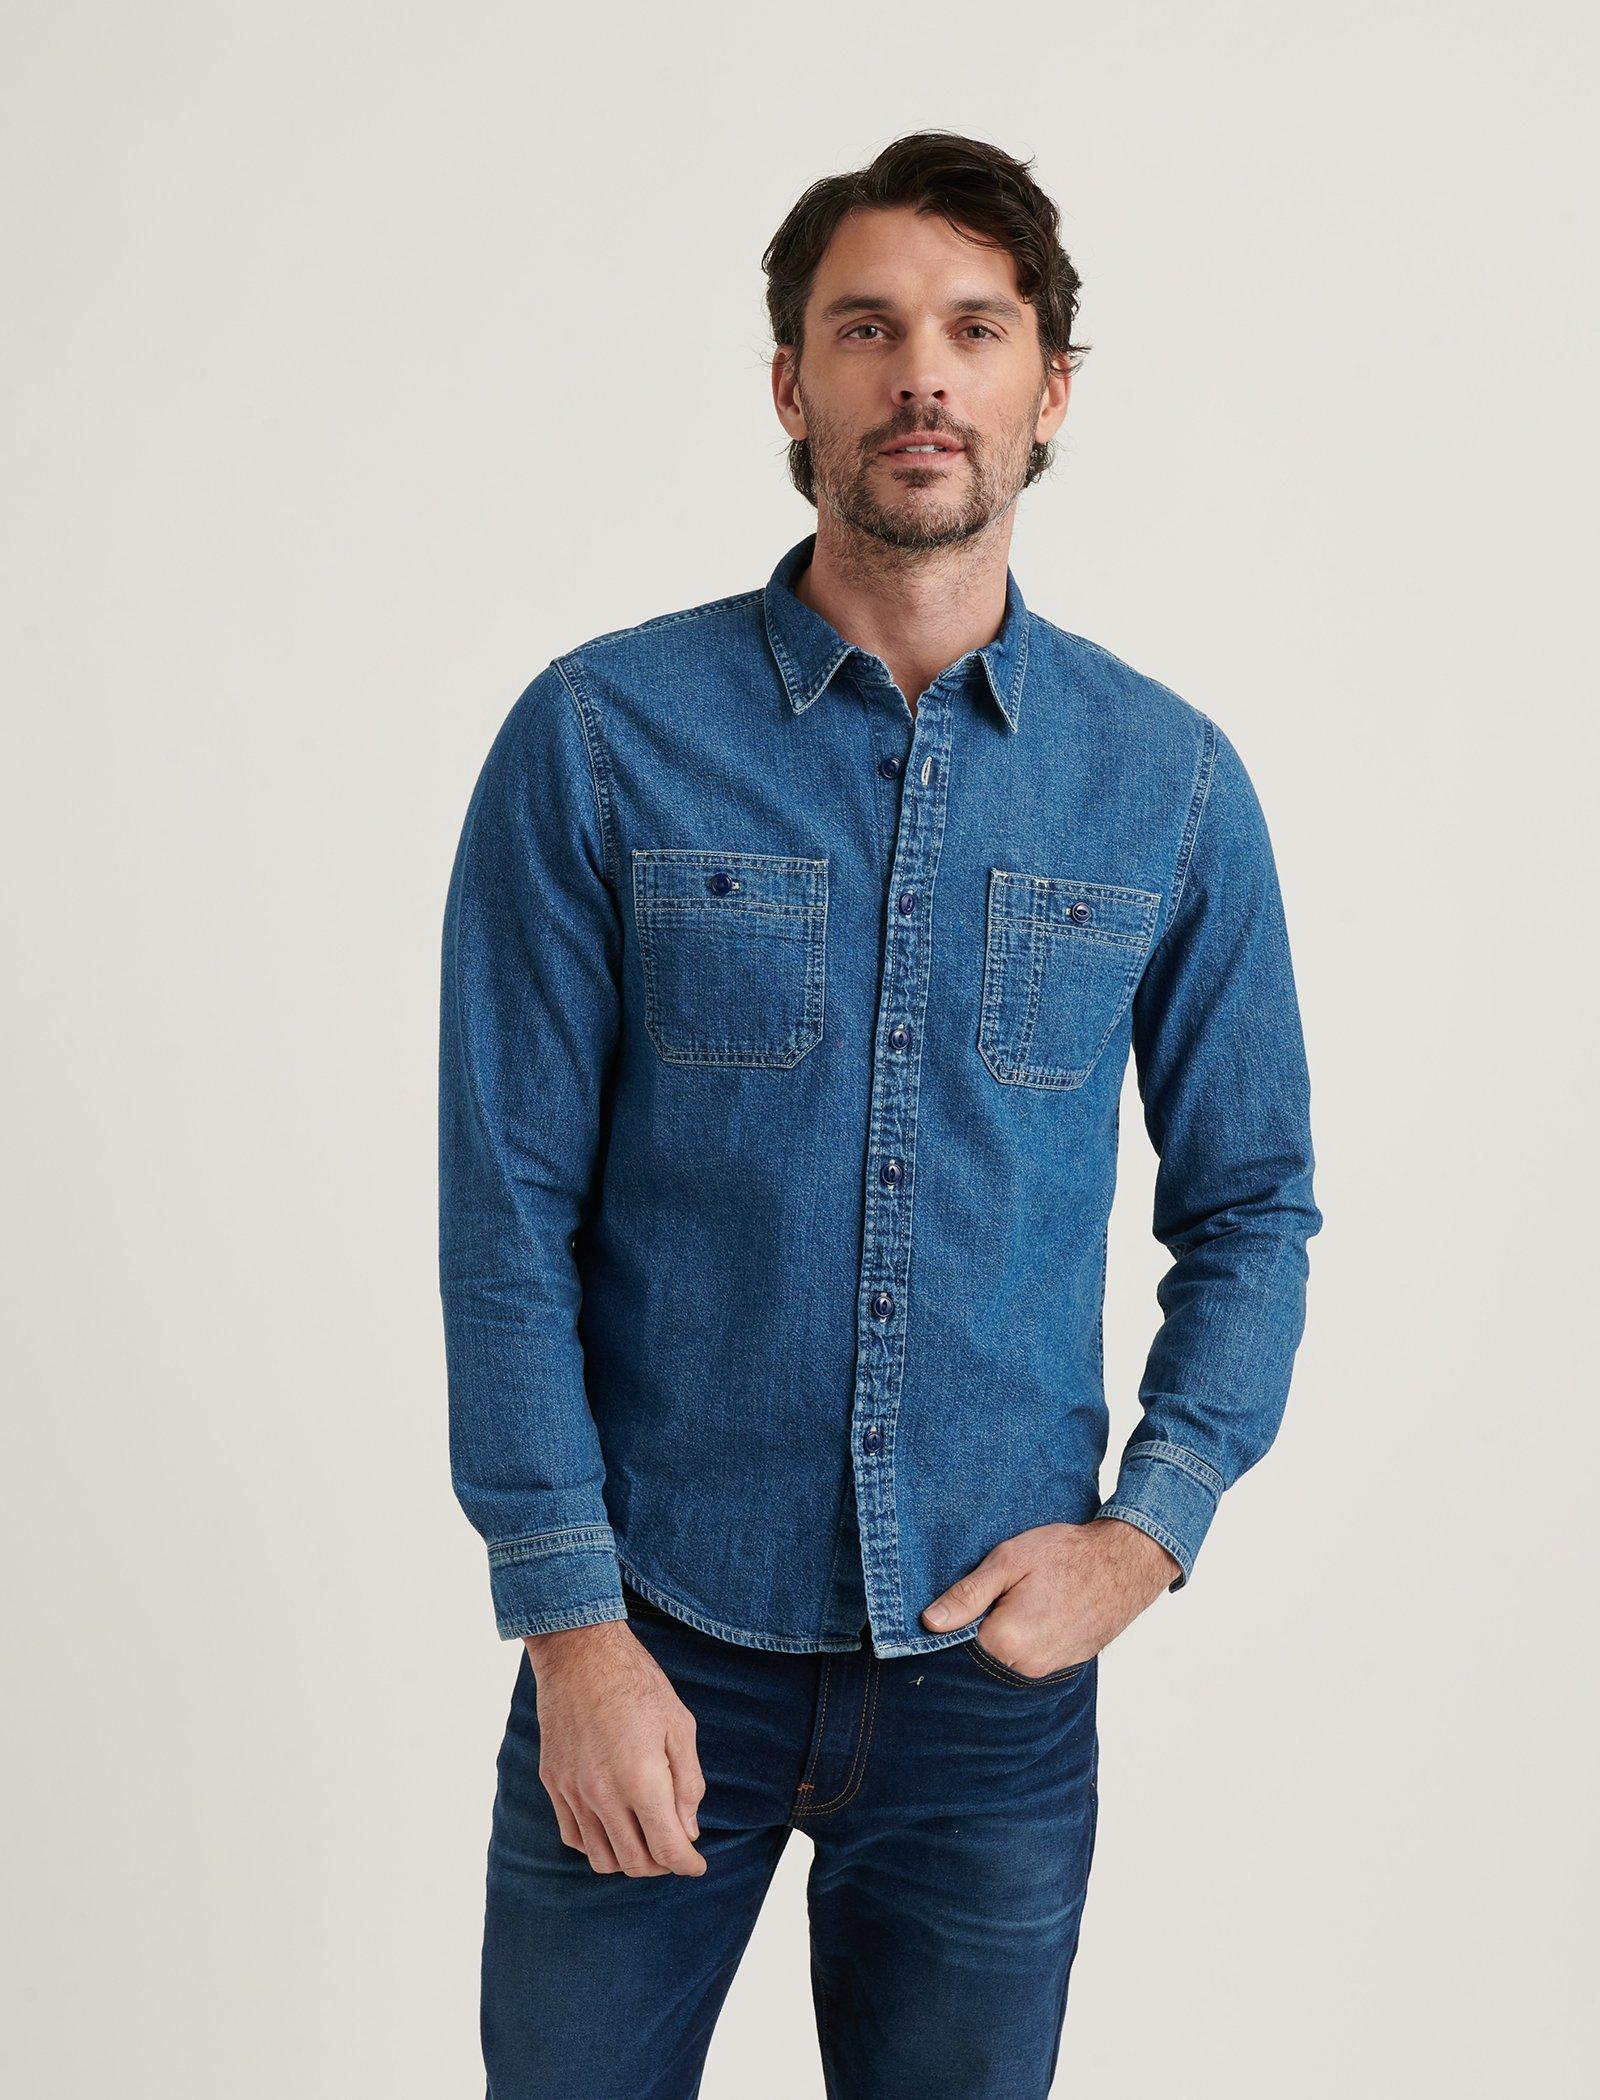 new fashionable branded double pocket solid denim shirts